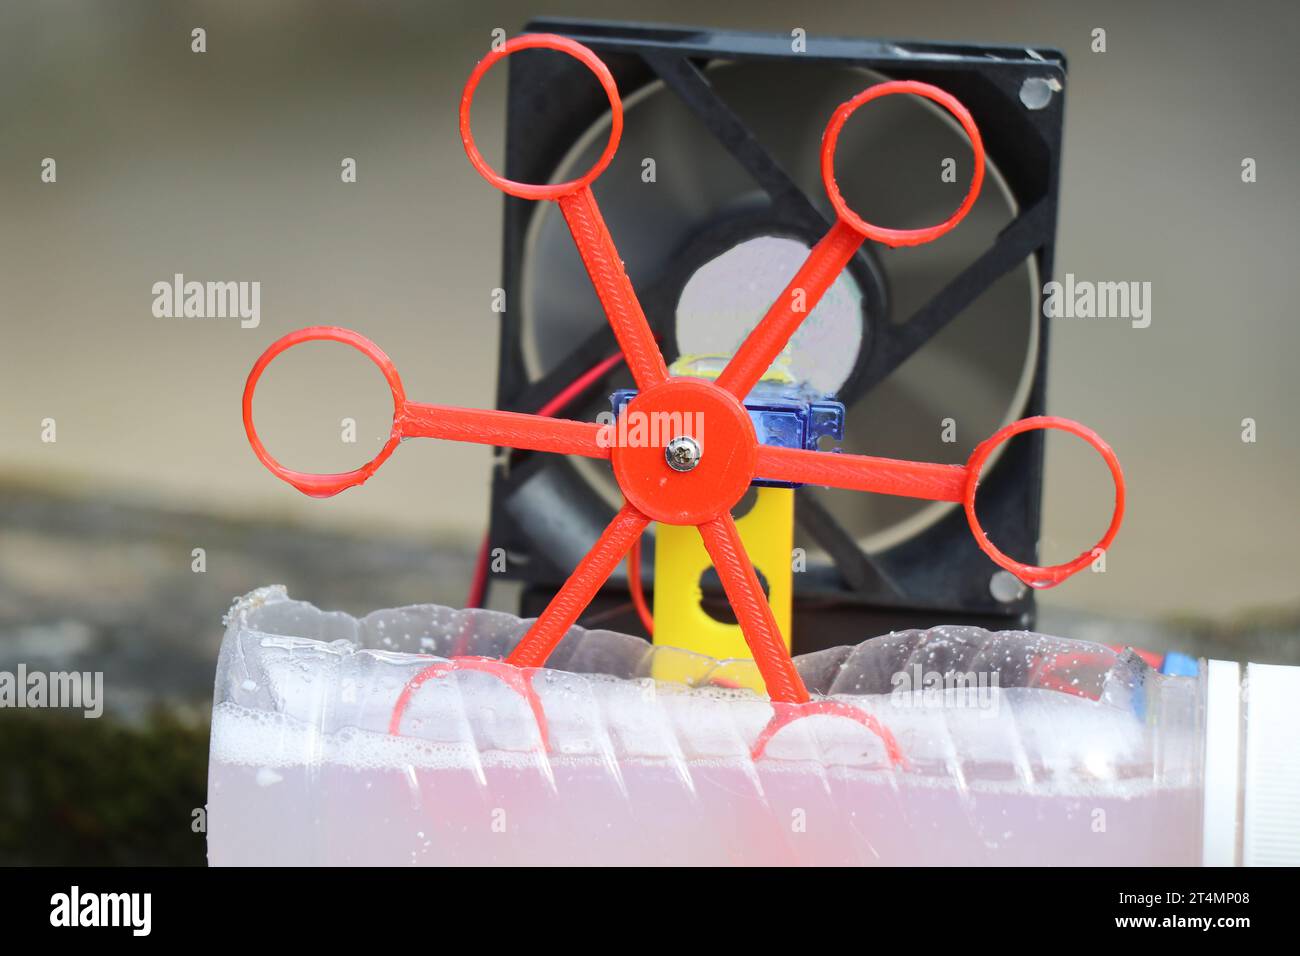 Automatic soap bubble blowing machine made with 3D printed parts built at home close up view Stock Photo